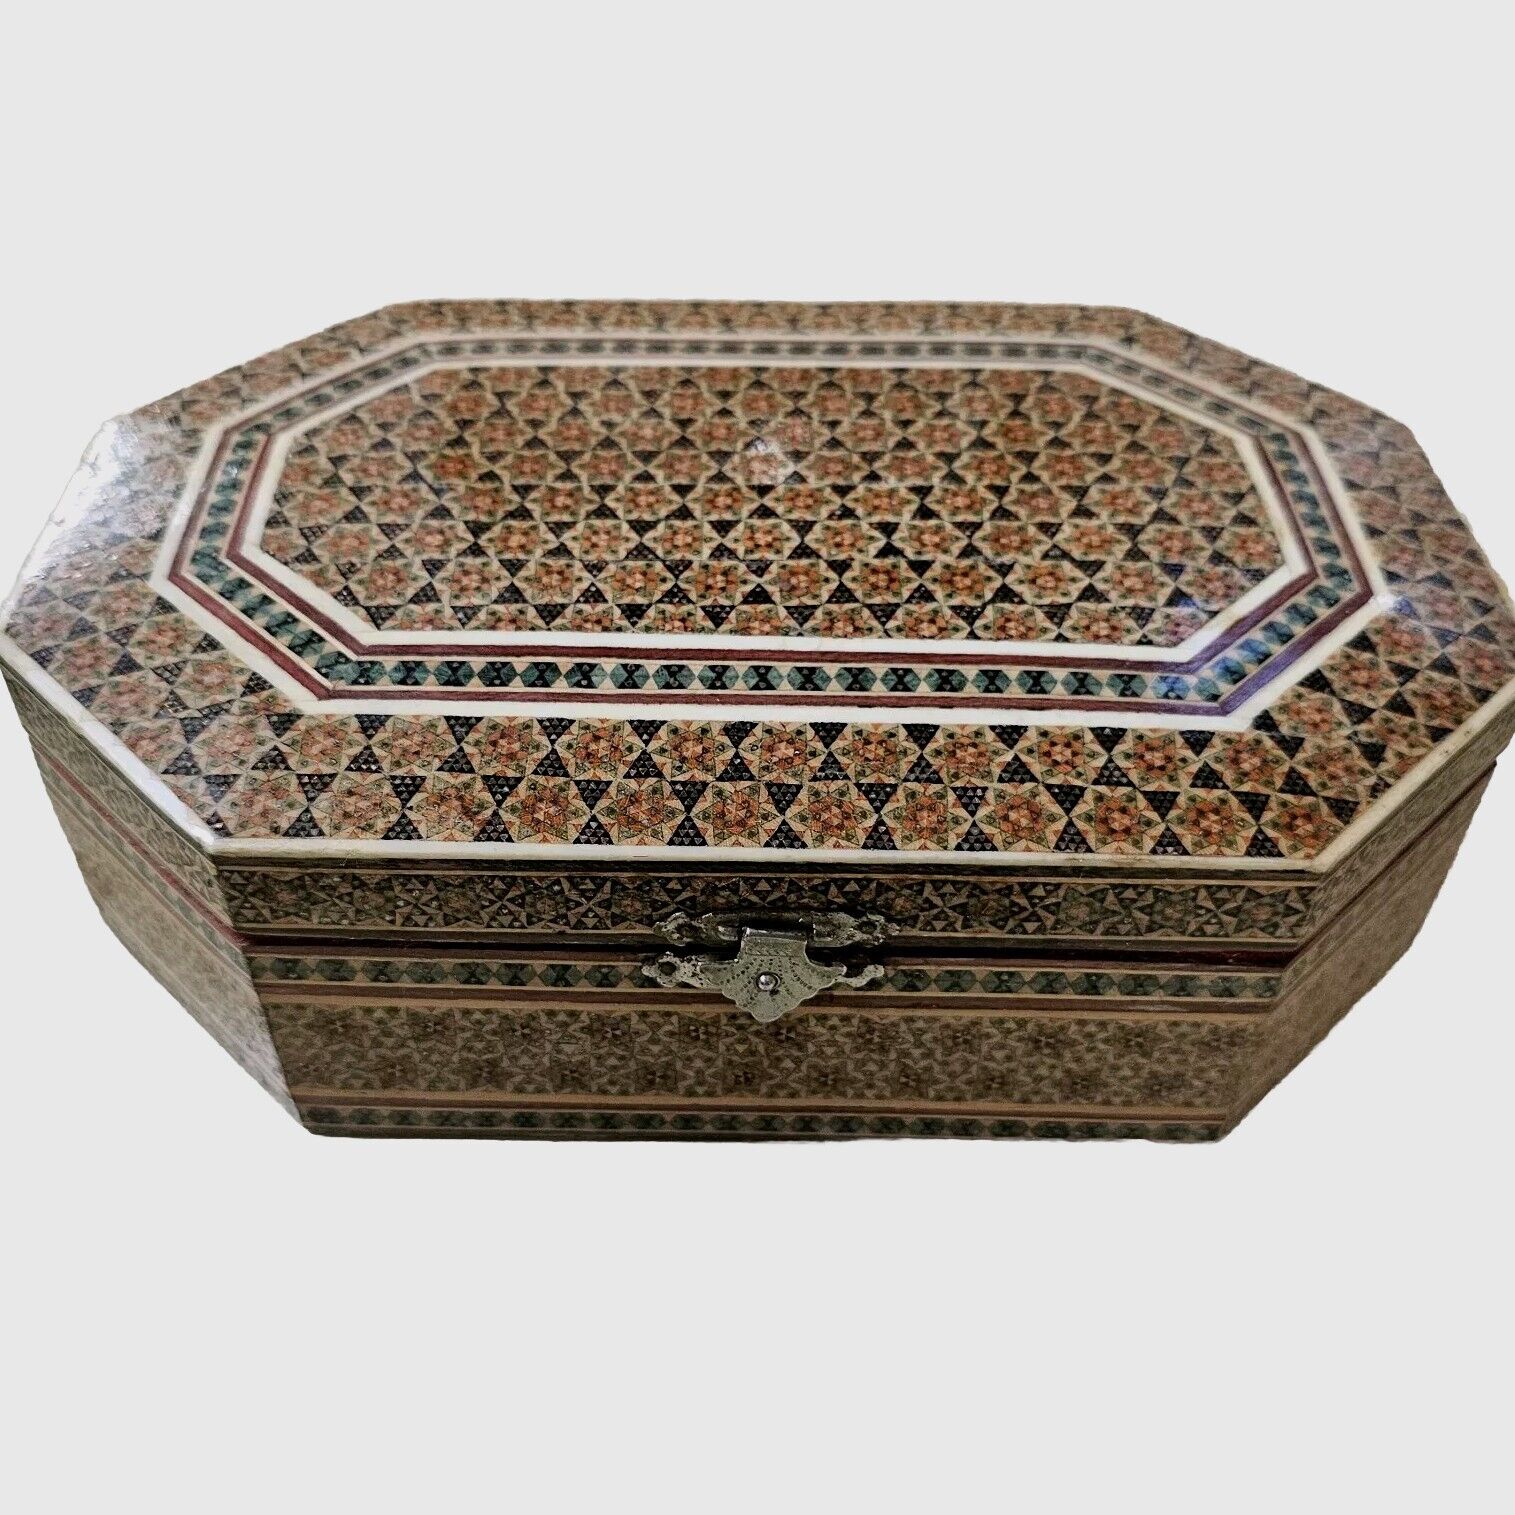 Vintage/antique Handcrafted Persian Khatam Inlaid Micro Mosaic Jewelry Box